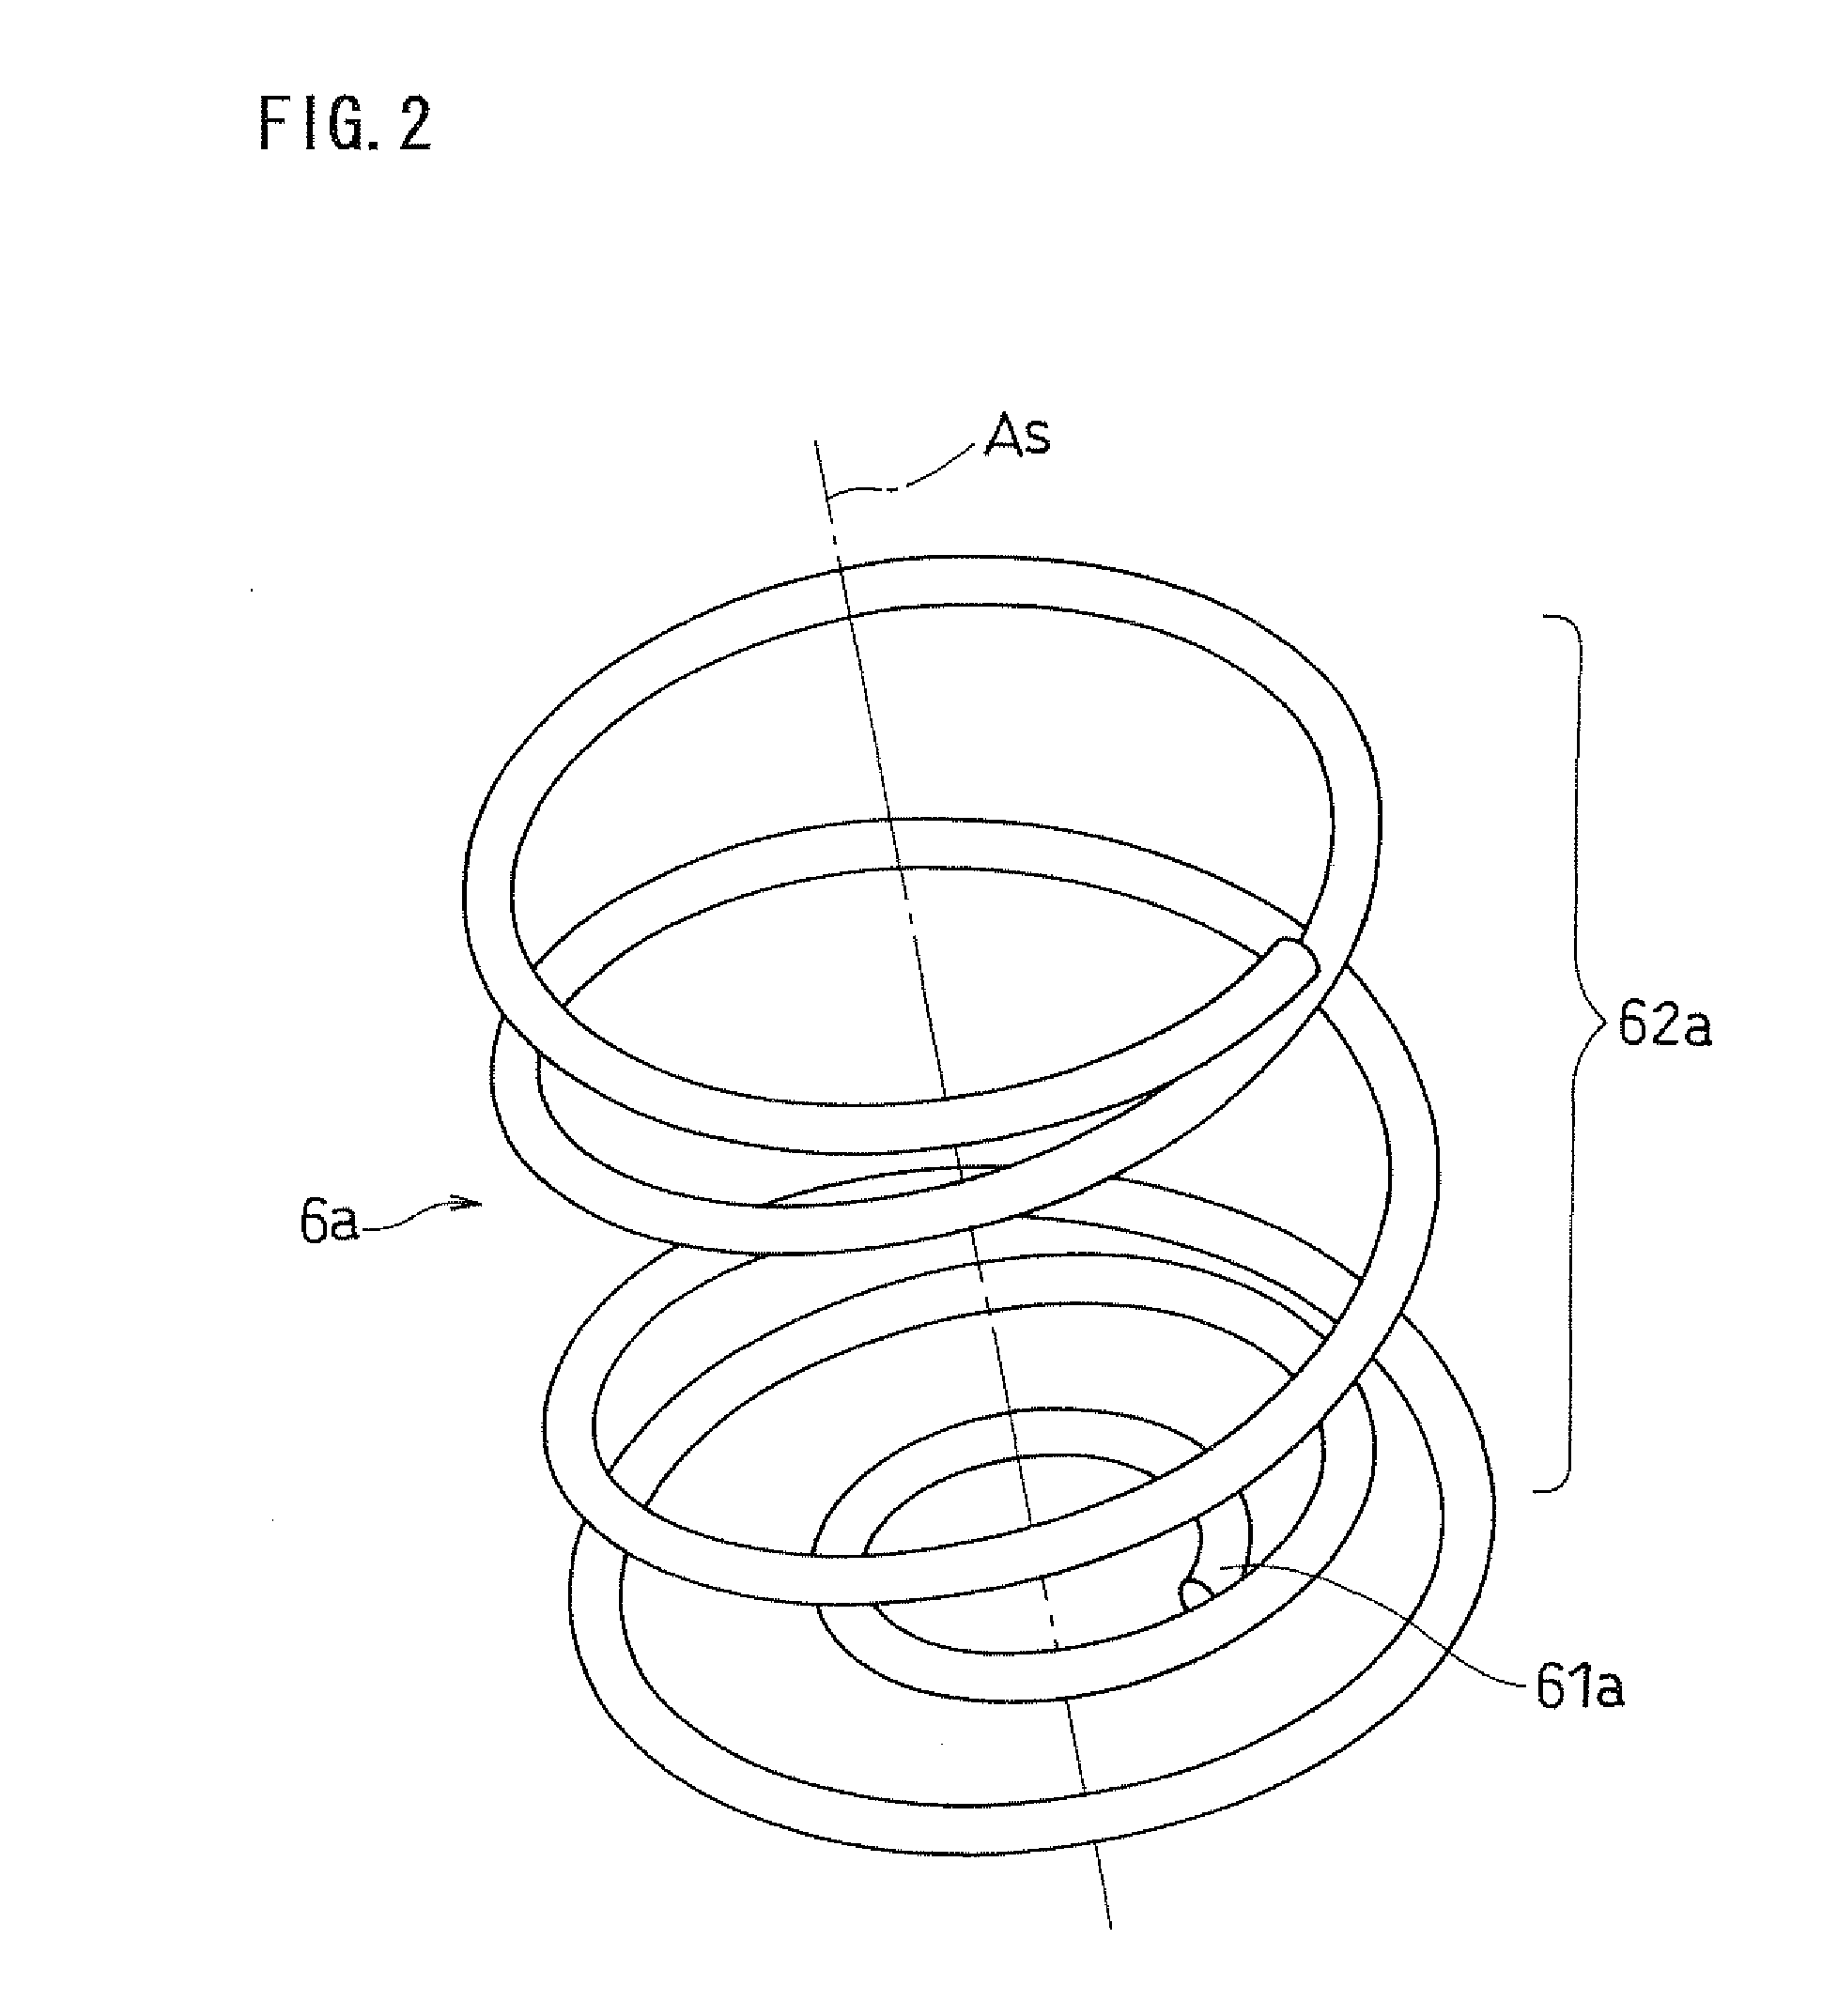 Coil spring structure of shutter button camera device and button structure of electronic device